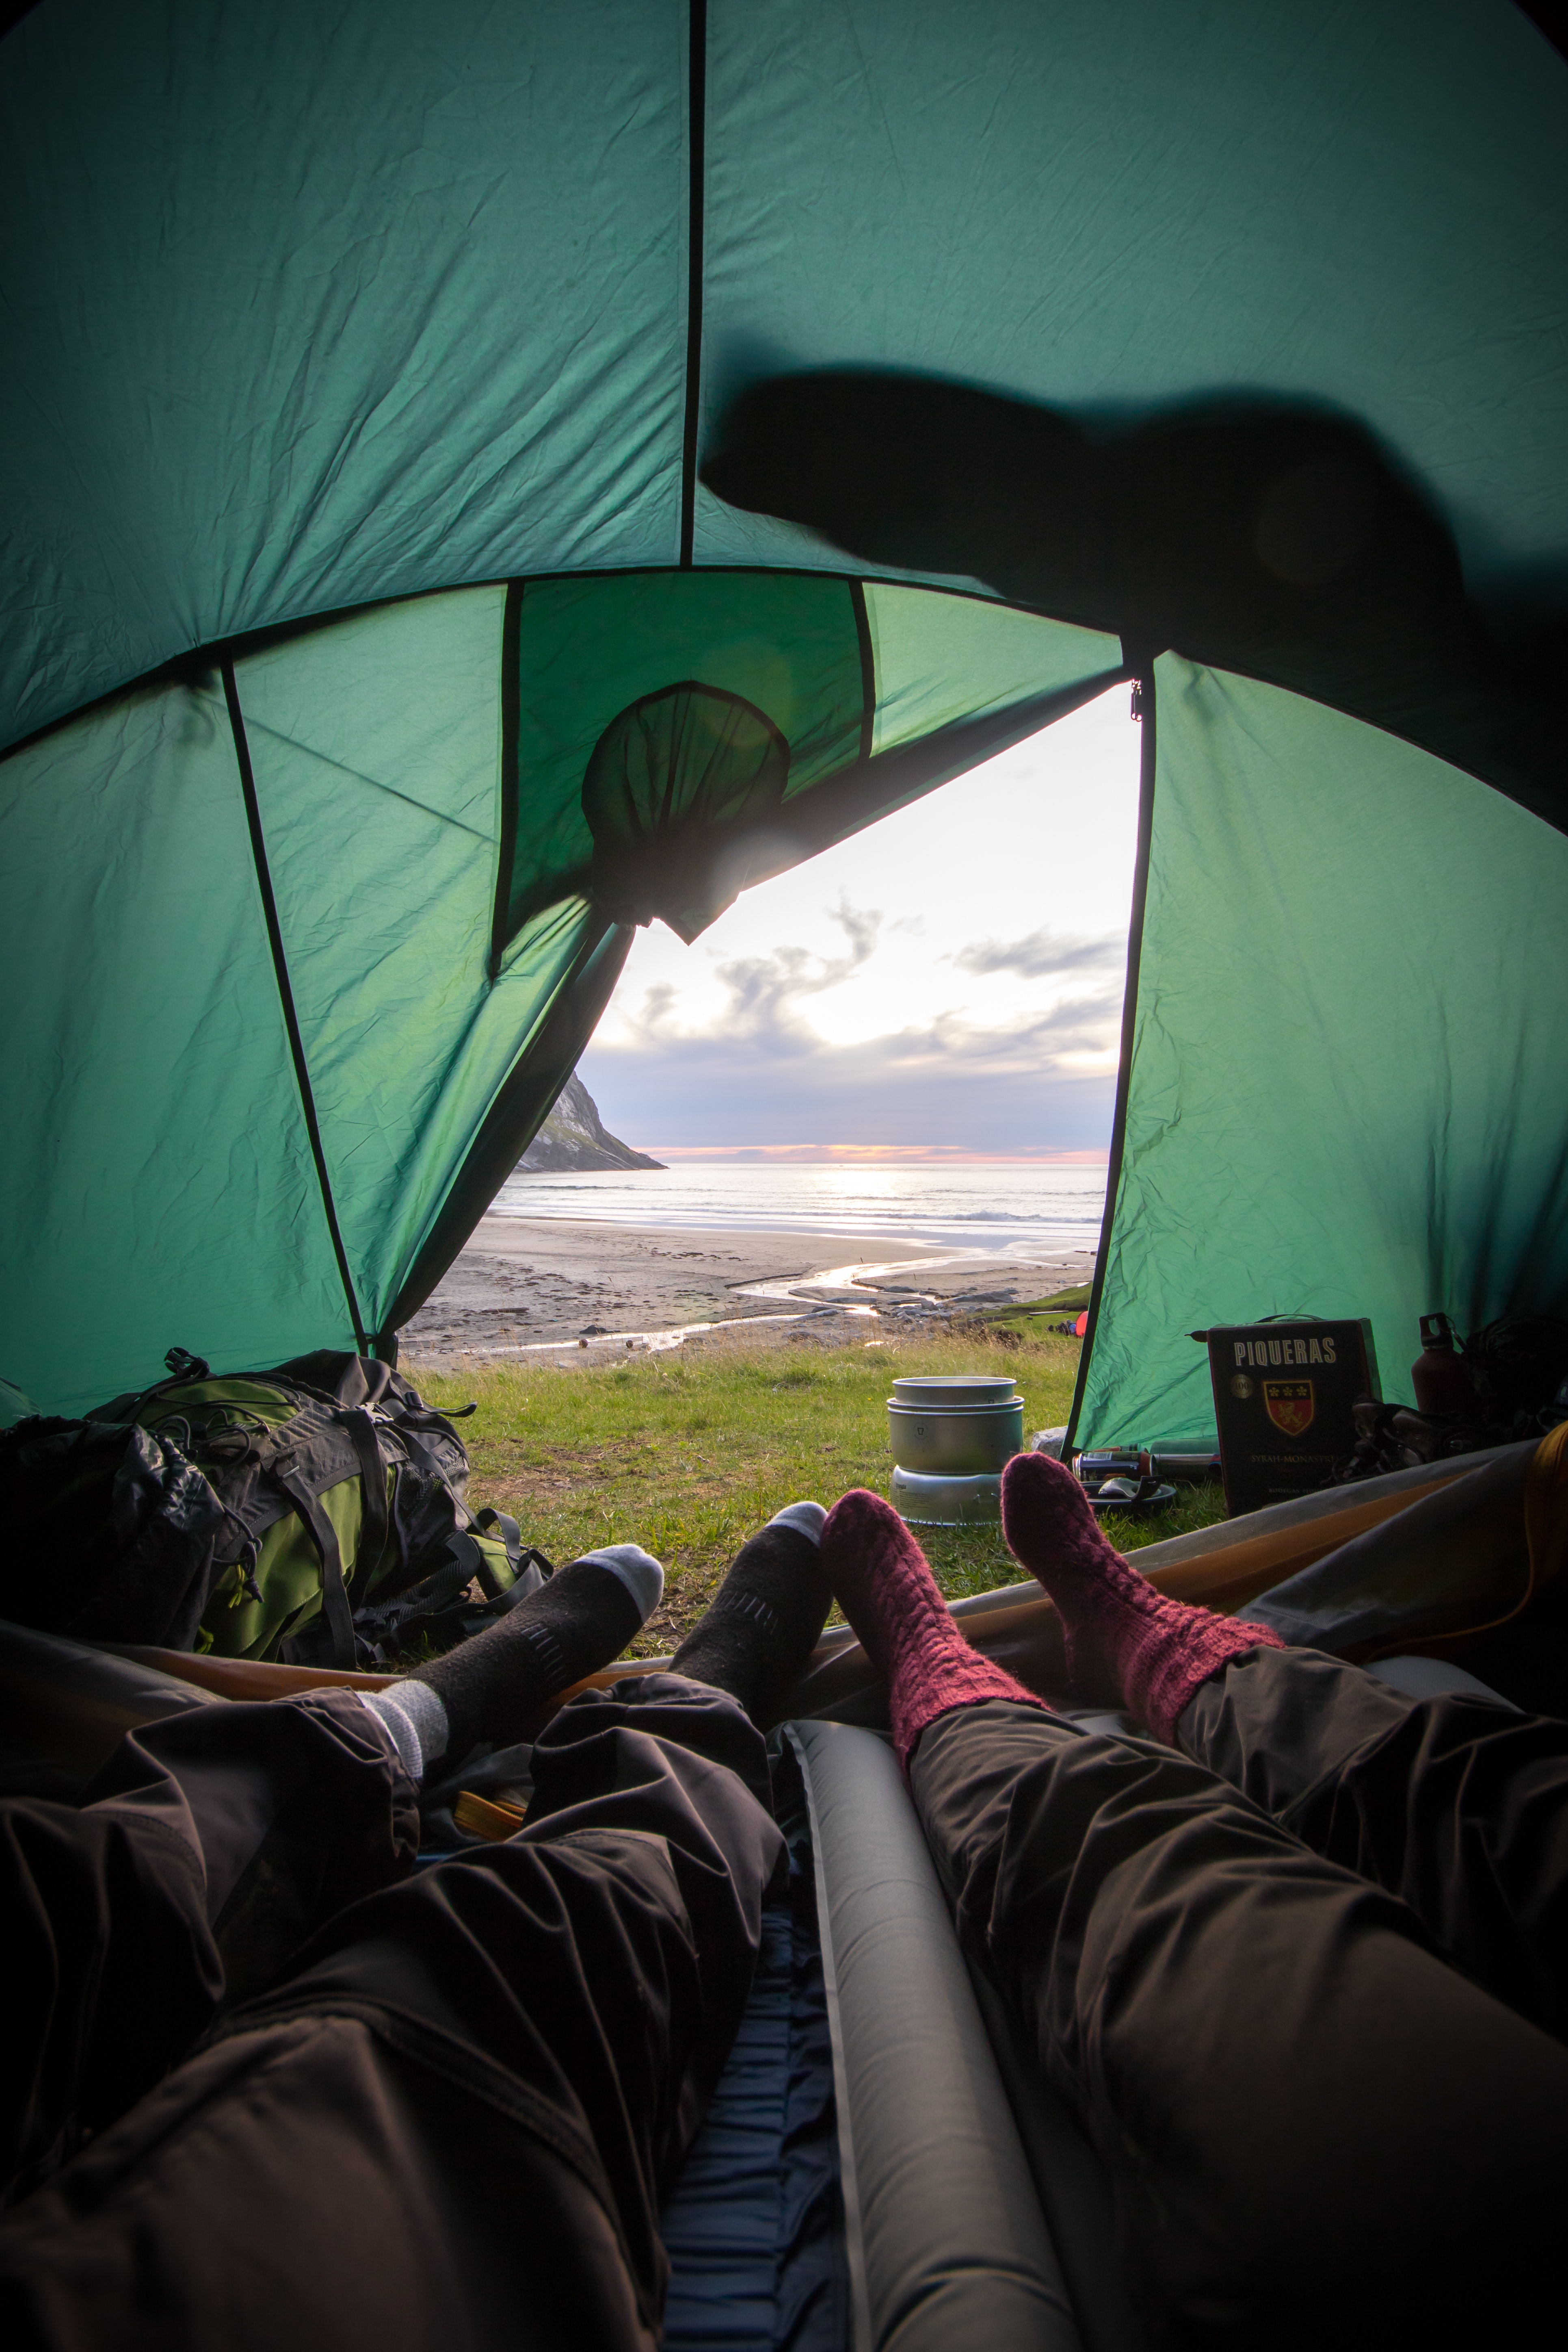 5 Creative Ways to Celebrate Your Birthday Outdoors - Go camping